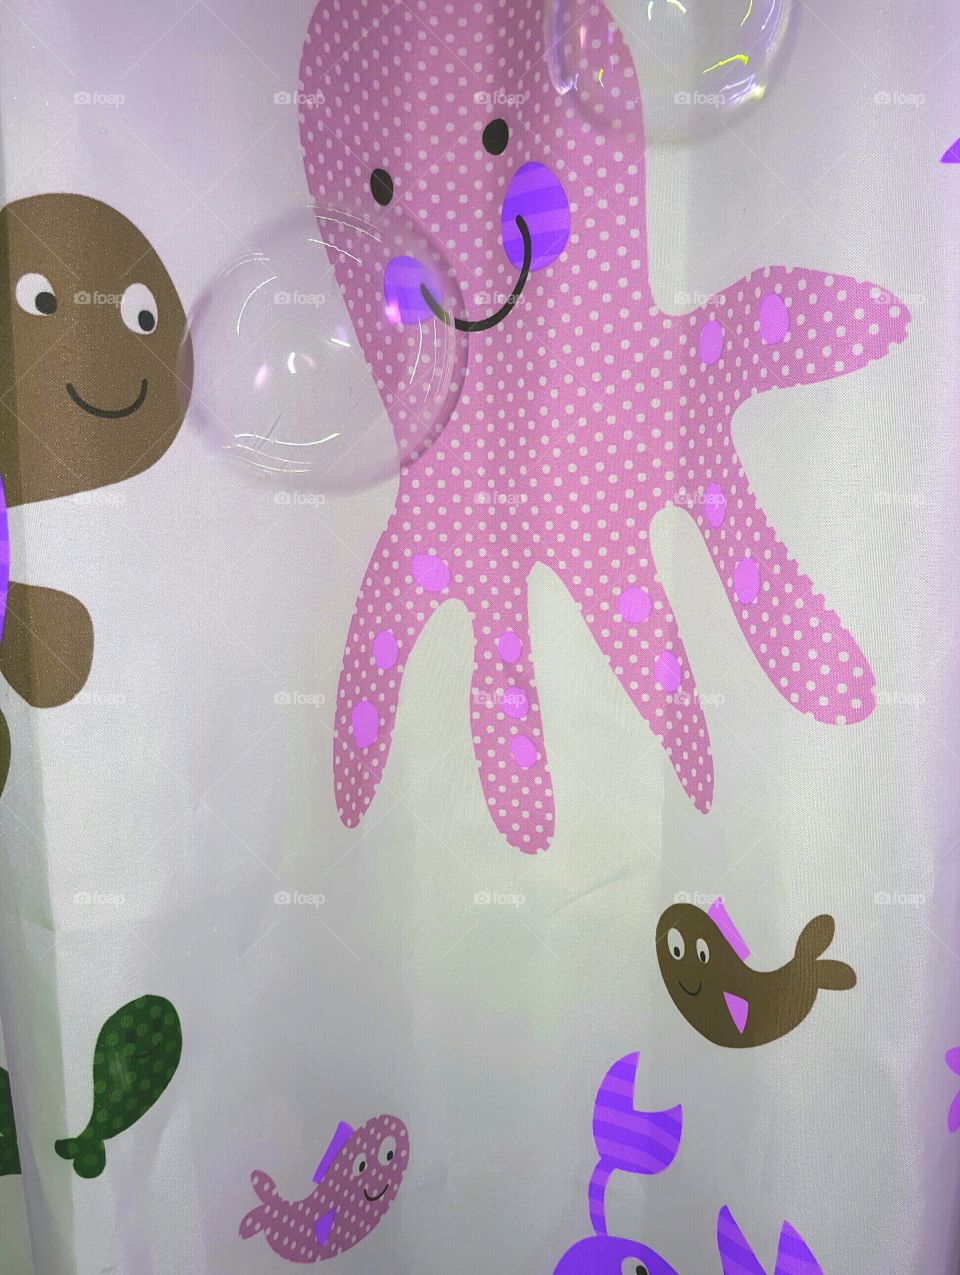 Bubbles on Child's Shower Curtain